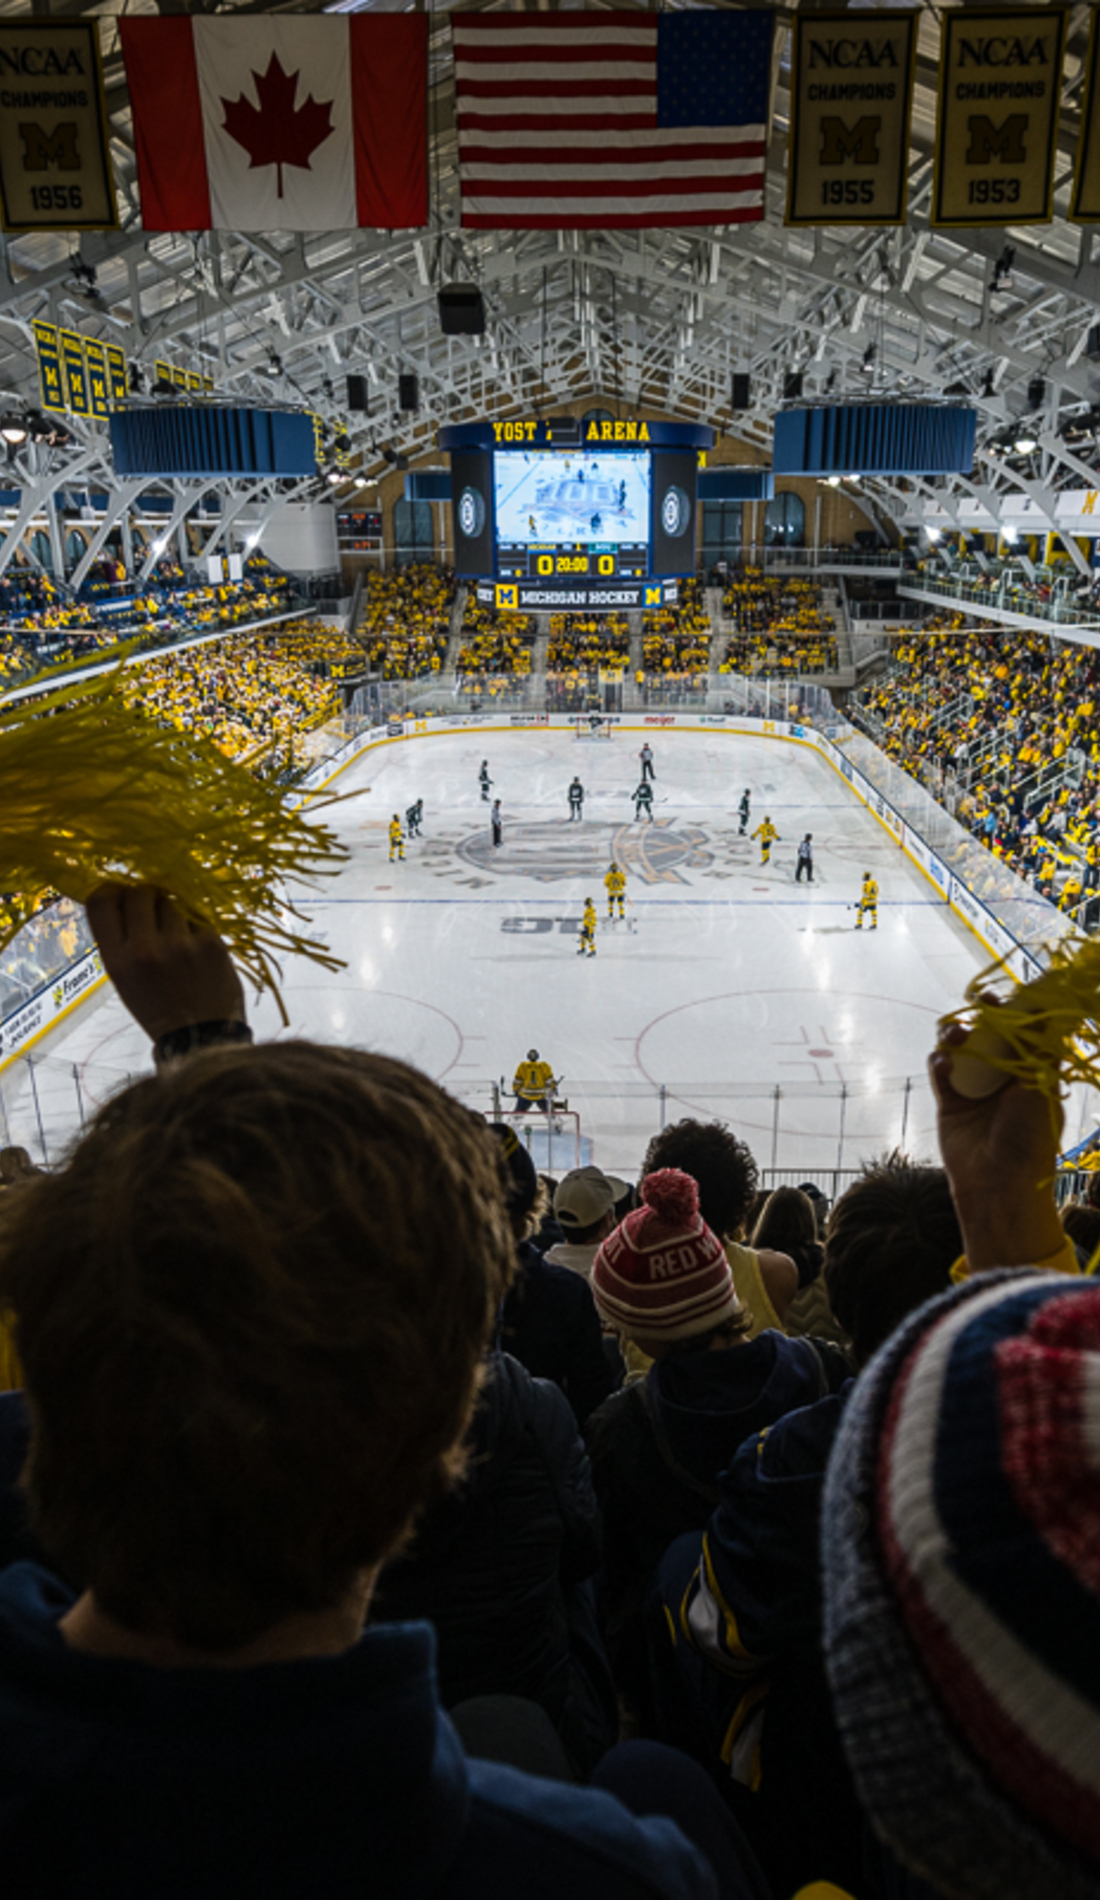 A Michigan Wolverines Hockey live event